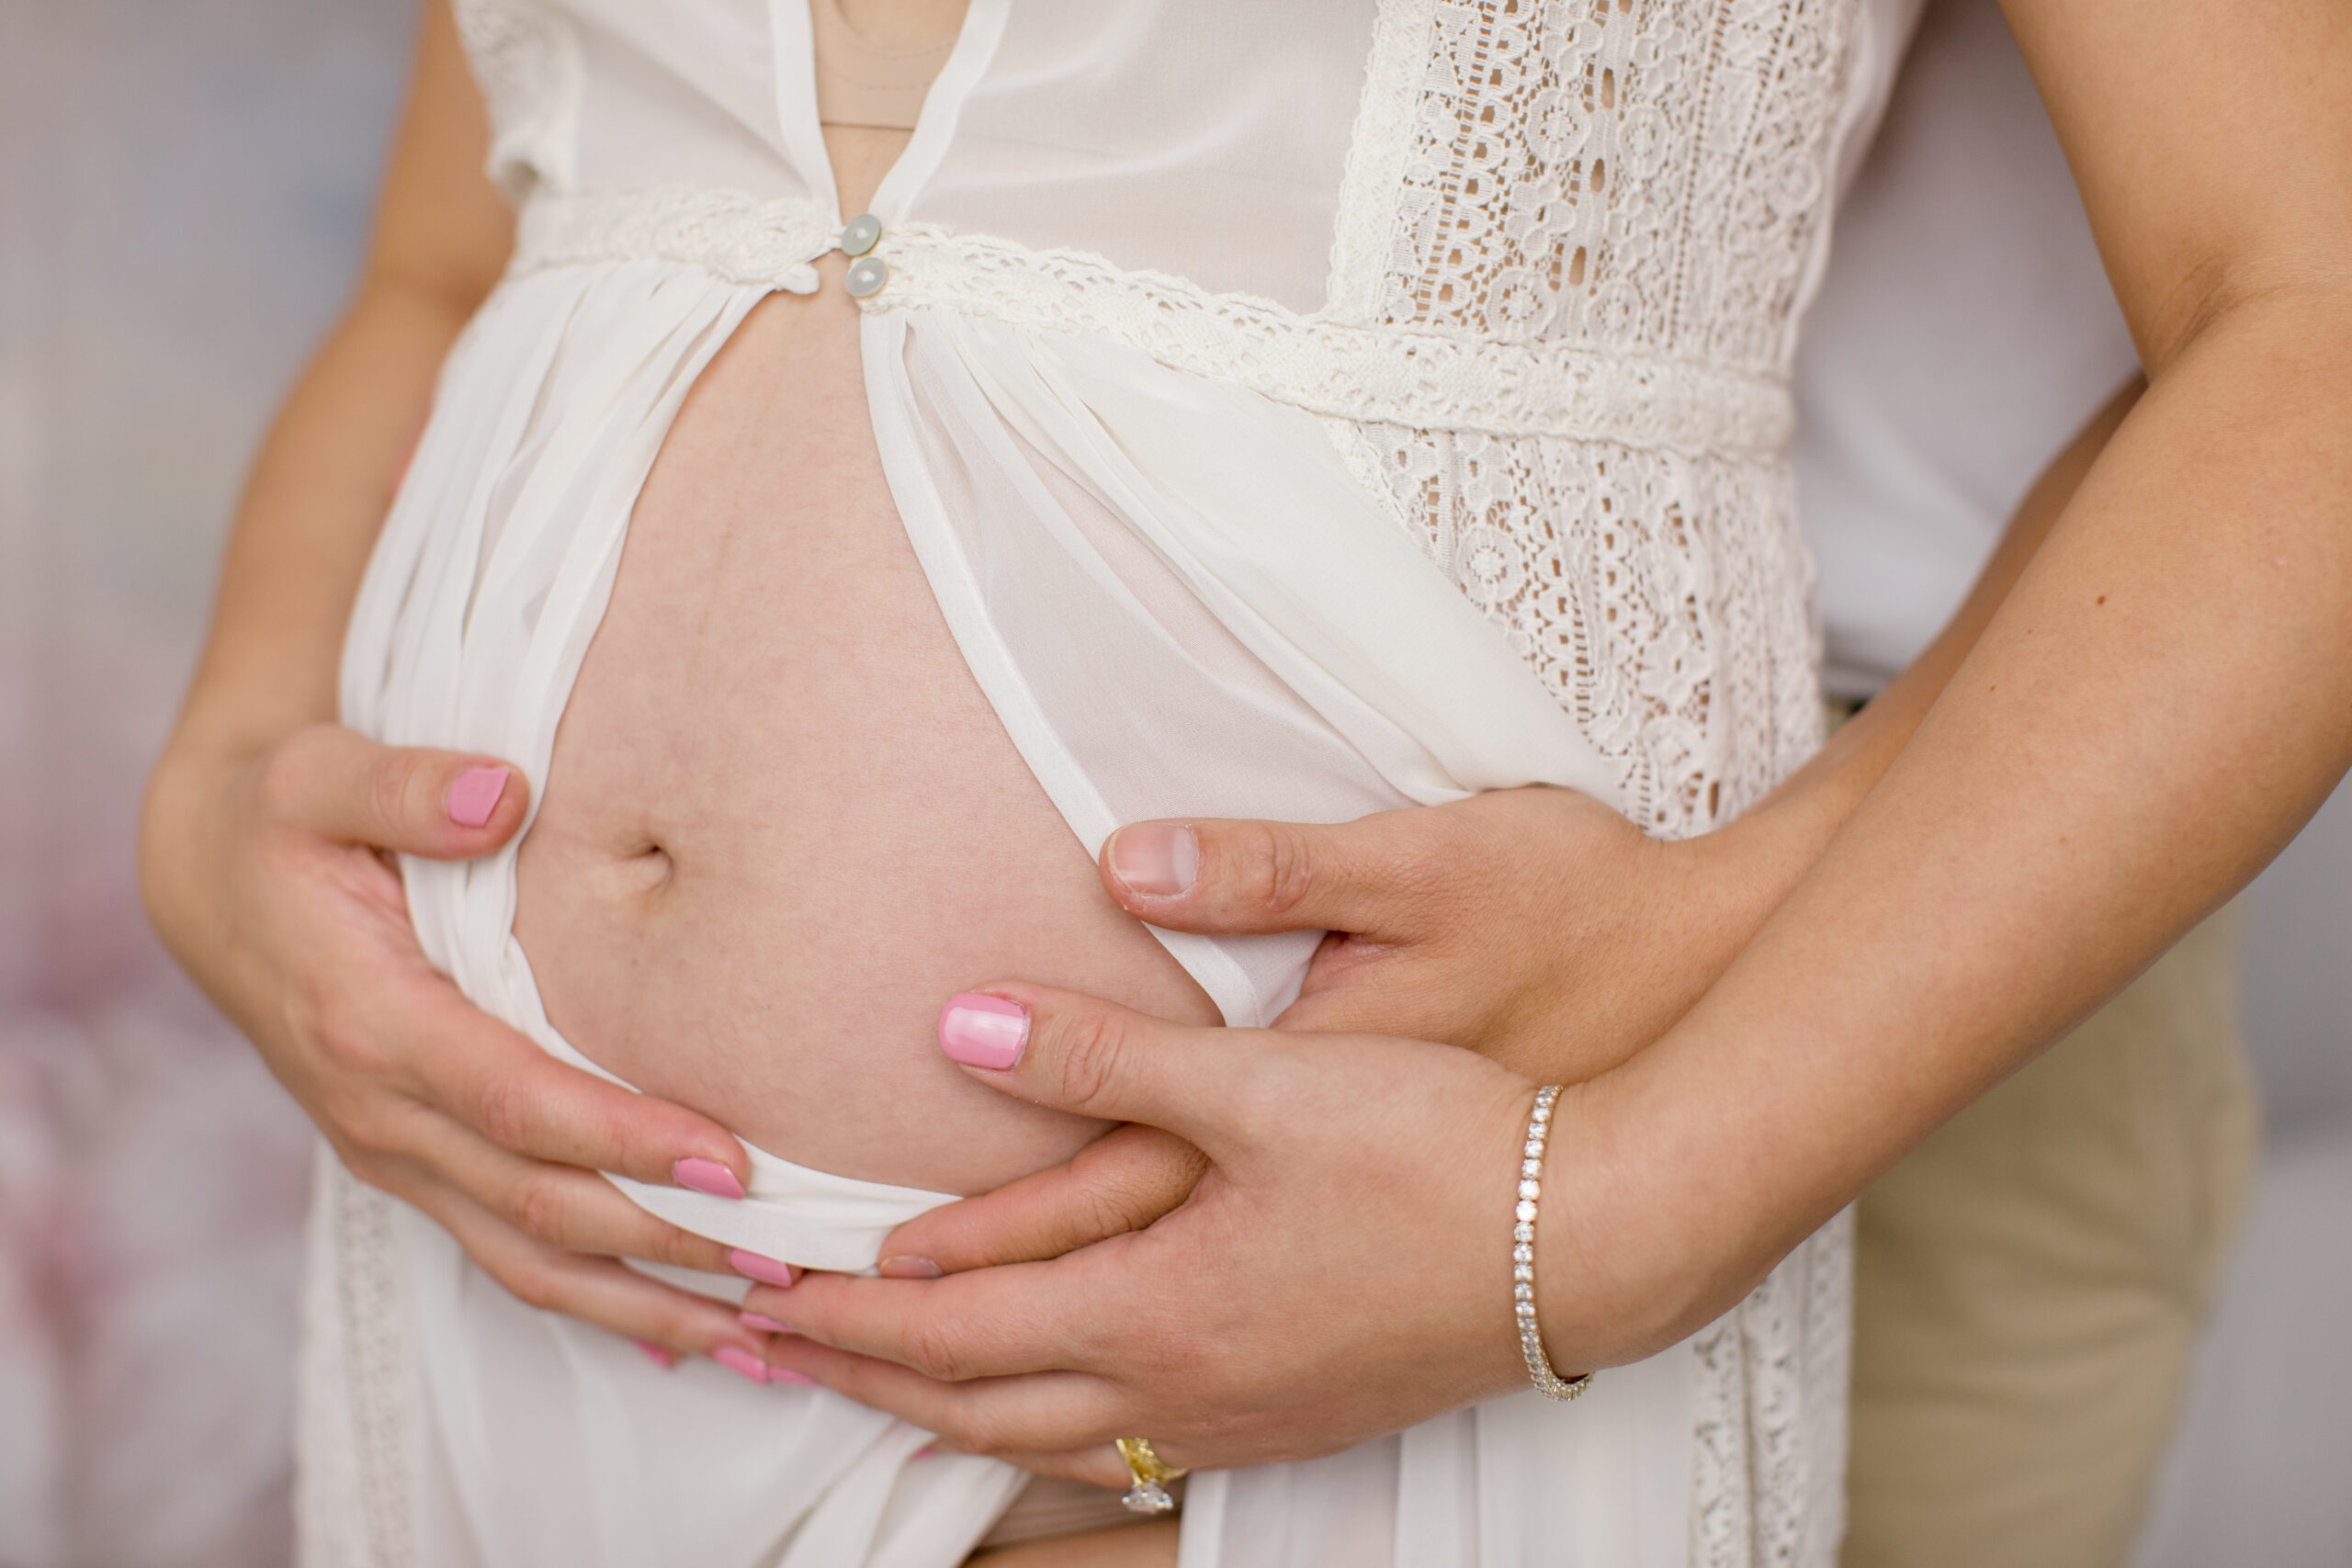 Close up of pregnant belly with soft light colors and lace texture.